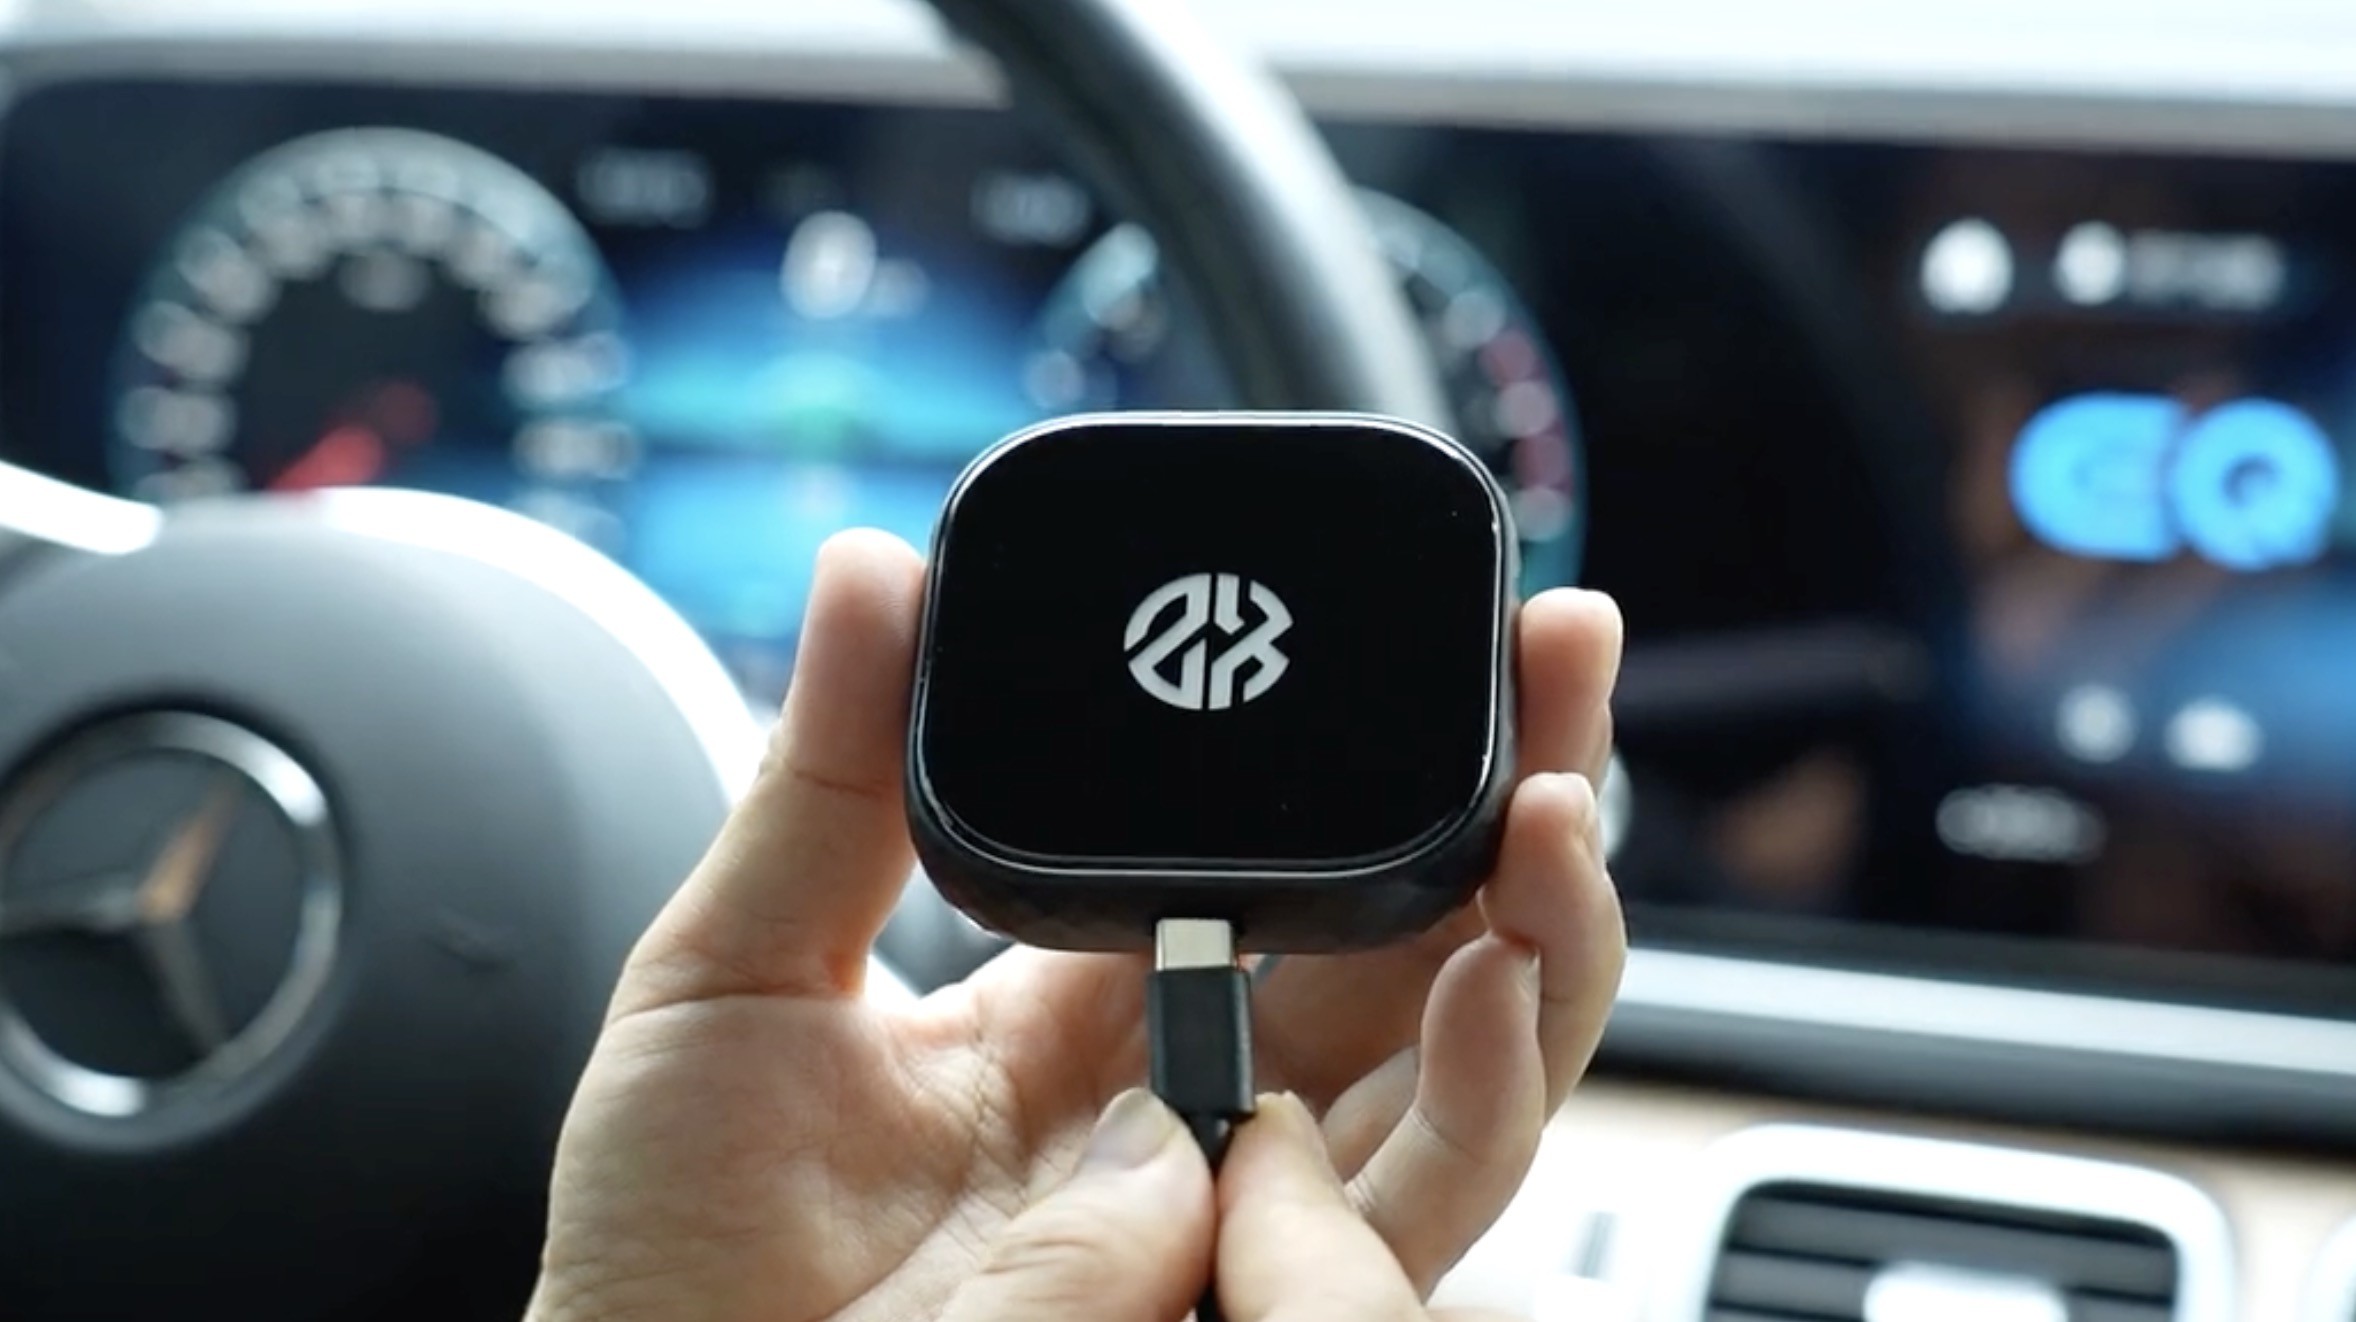 New Device Promises to Convert Wired CarPlay to Wireless